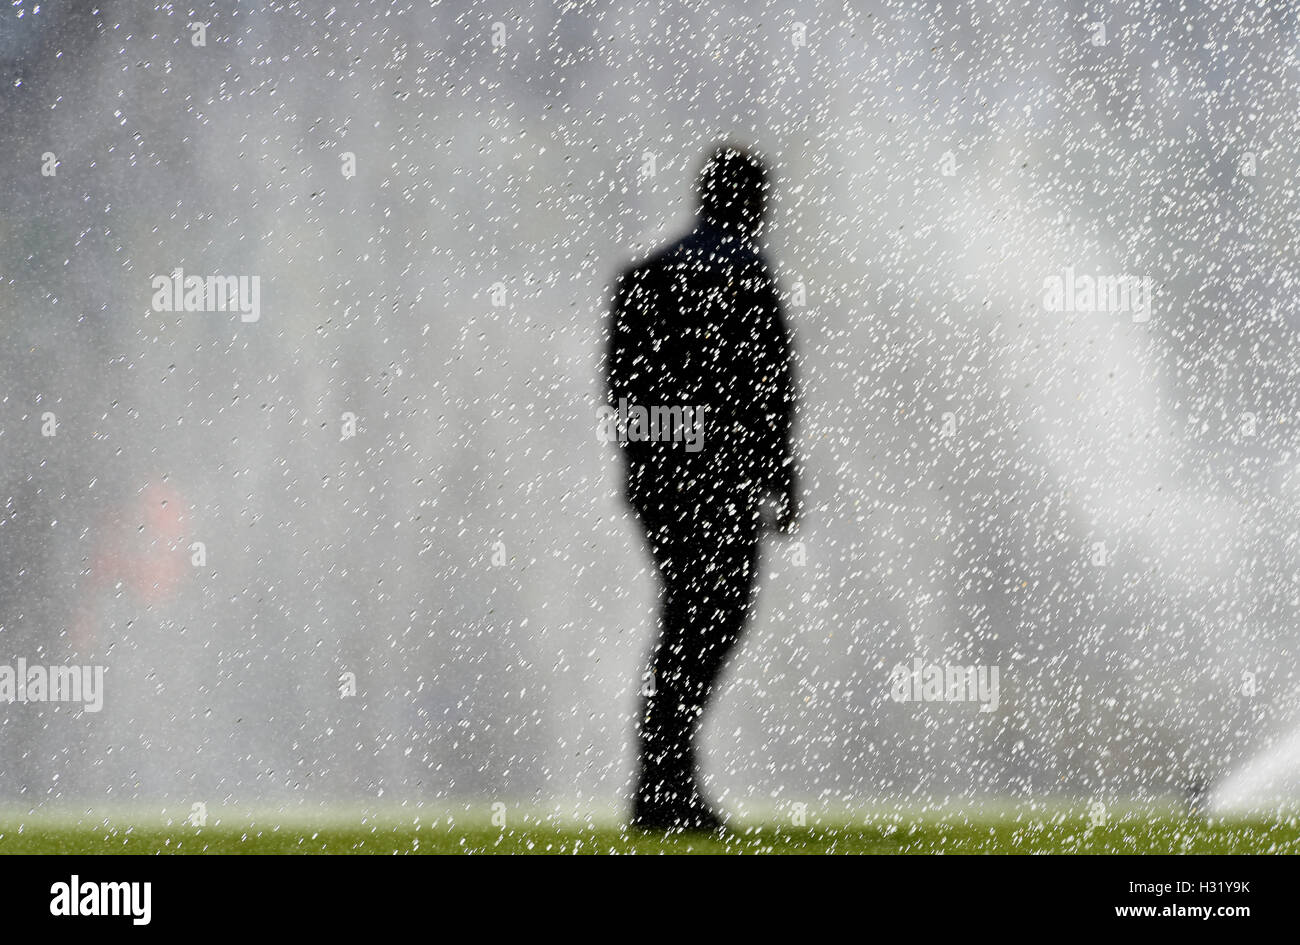 Sports field water sprinkler watering grass turf with ground staff silhouette figure Stock Photo